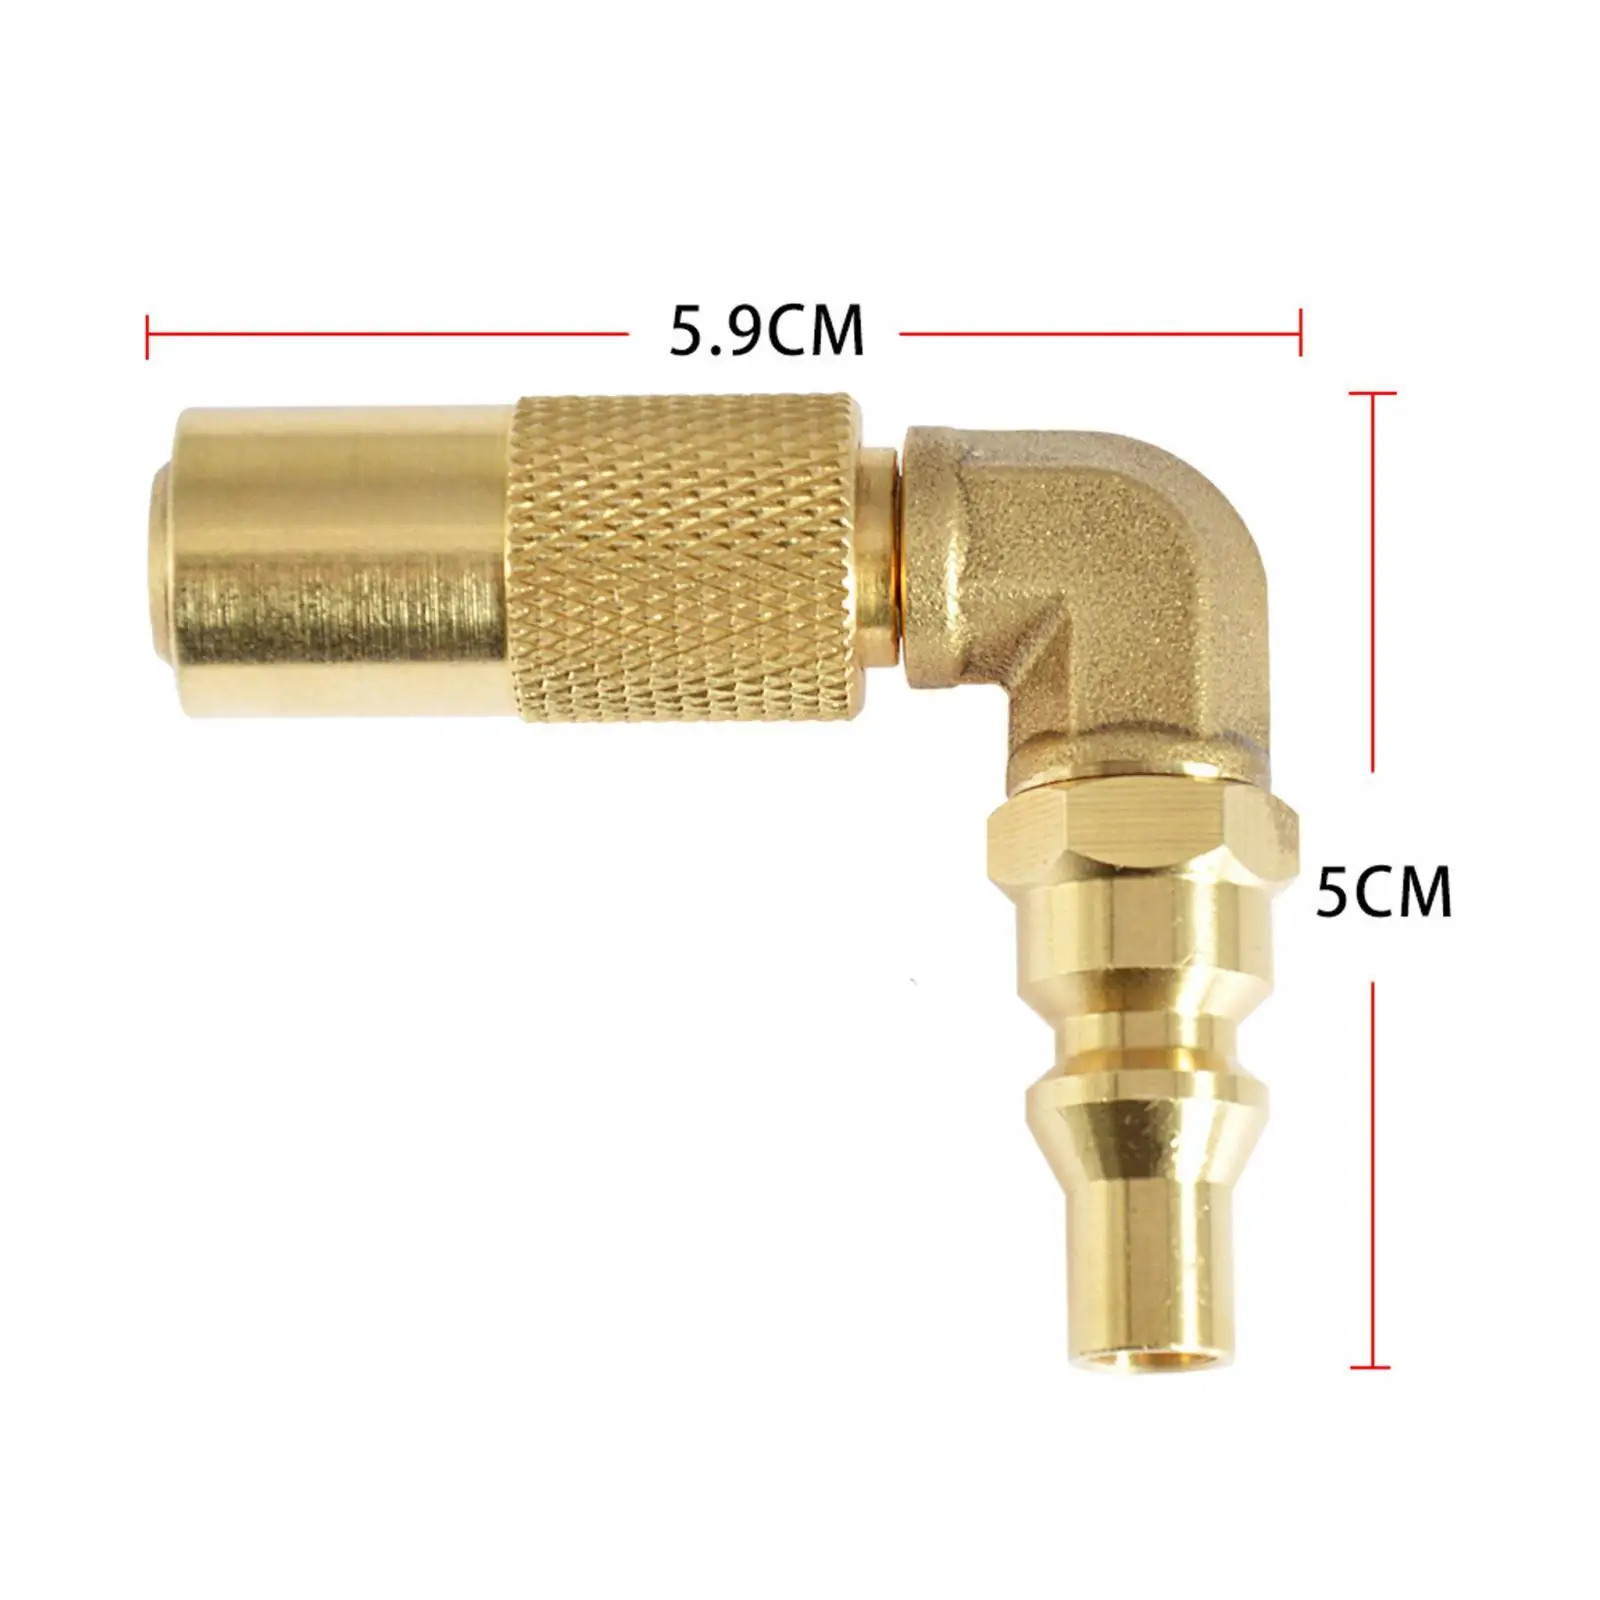 1/4` RV Quick Connect Adapter Conversion Fitting Elbow Brass Propane Gas Propane Elbow Adapter for Grill RV BBQ Trailer Camping